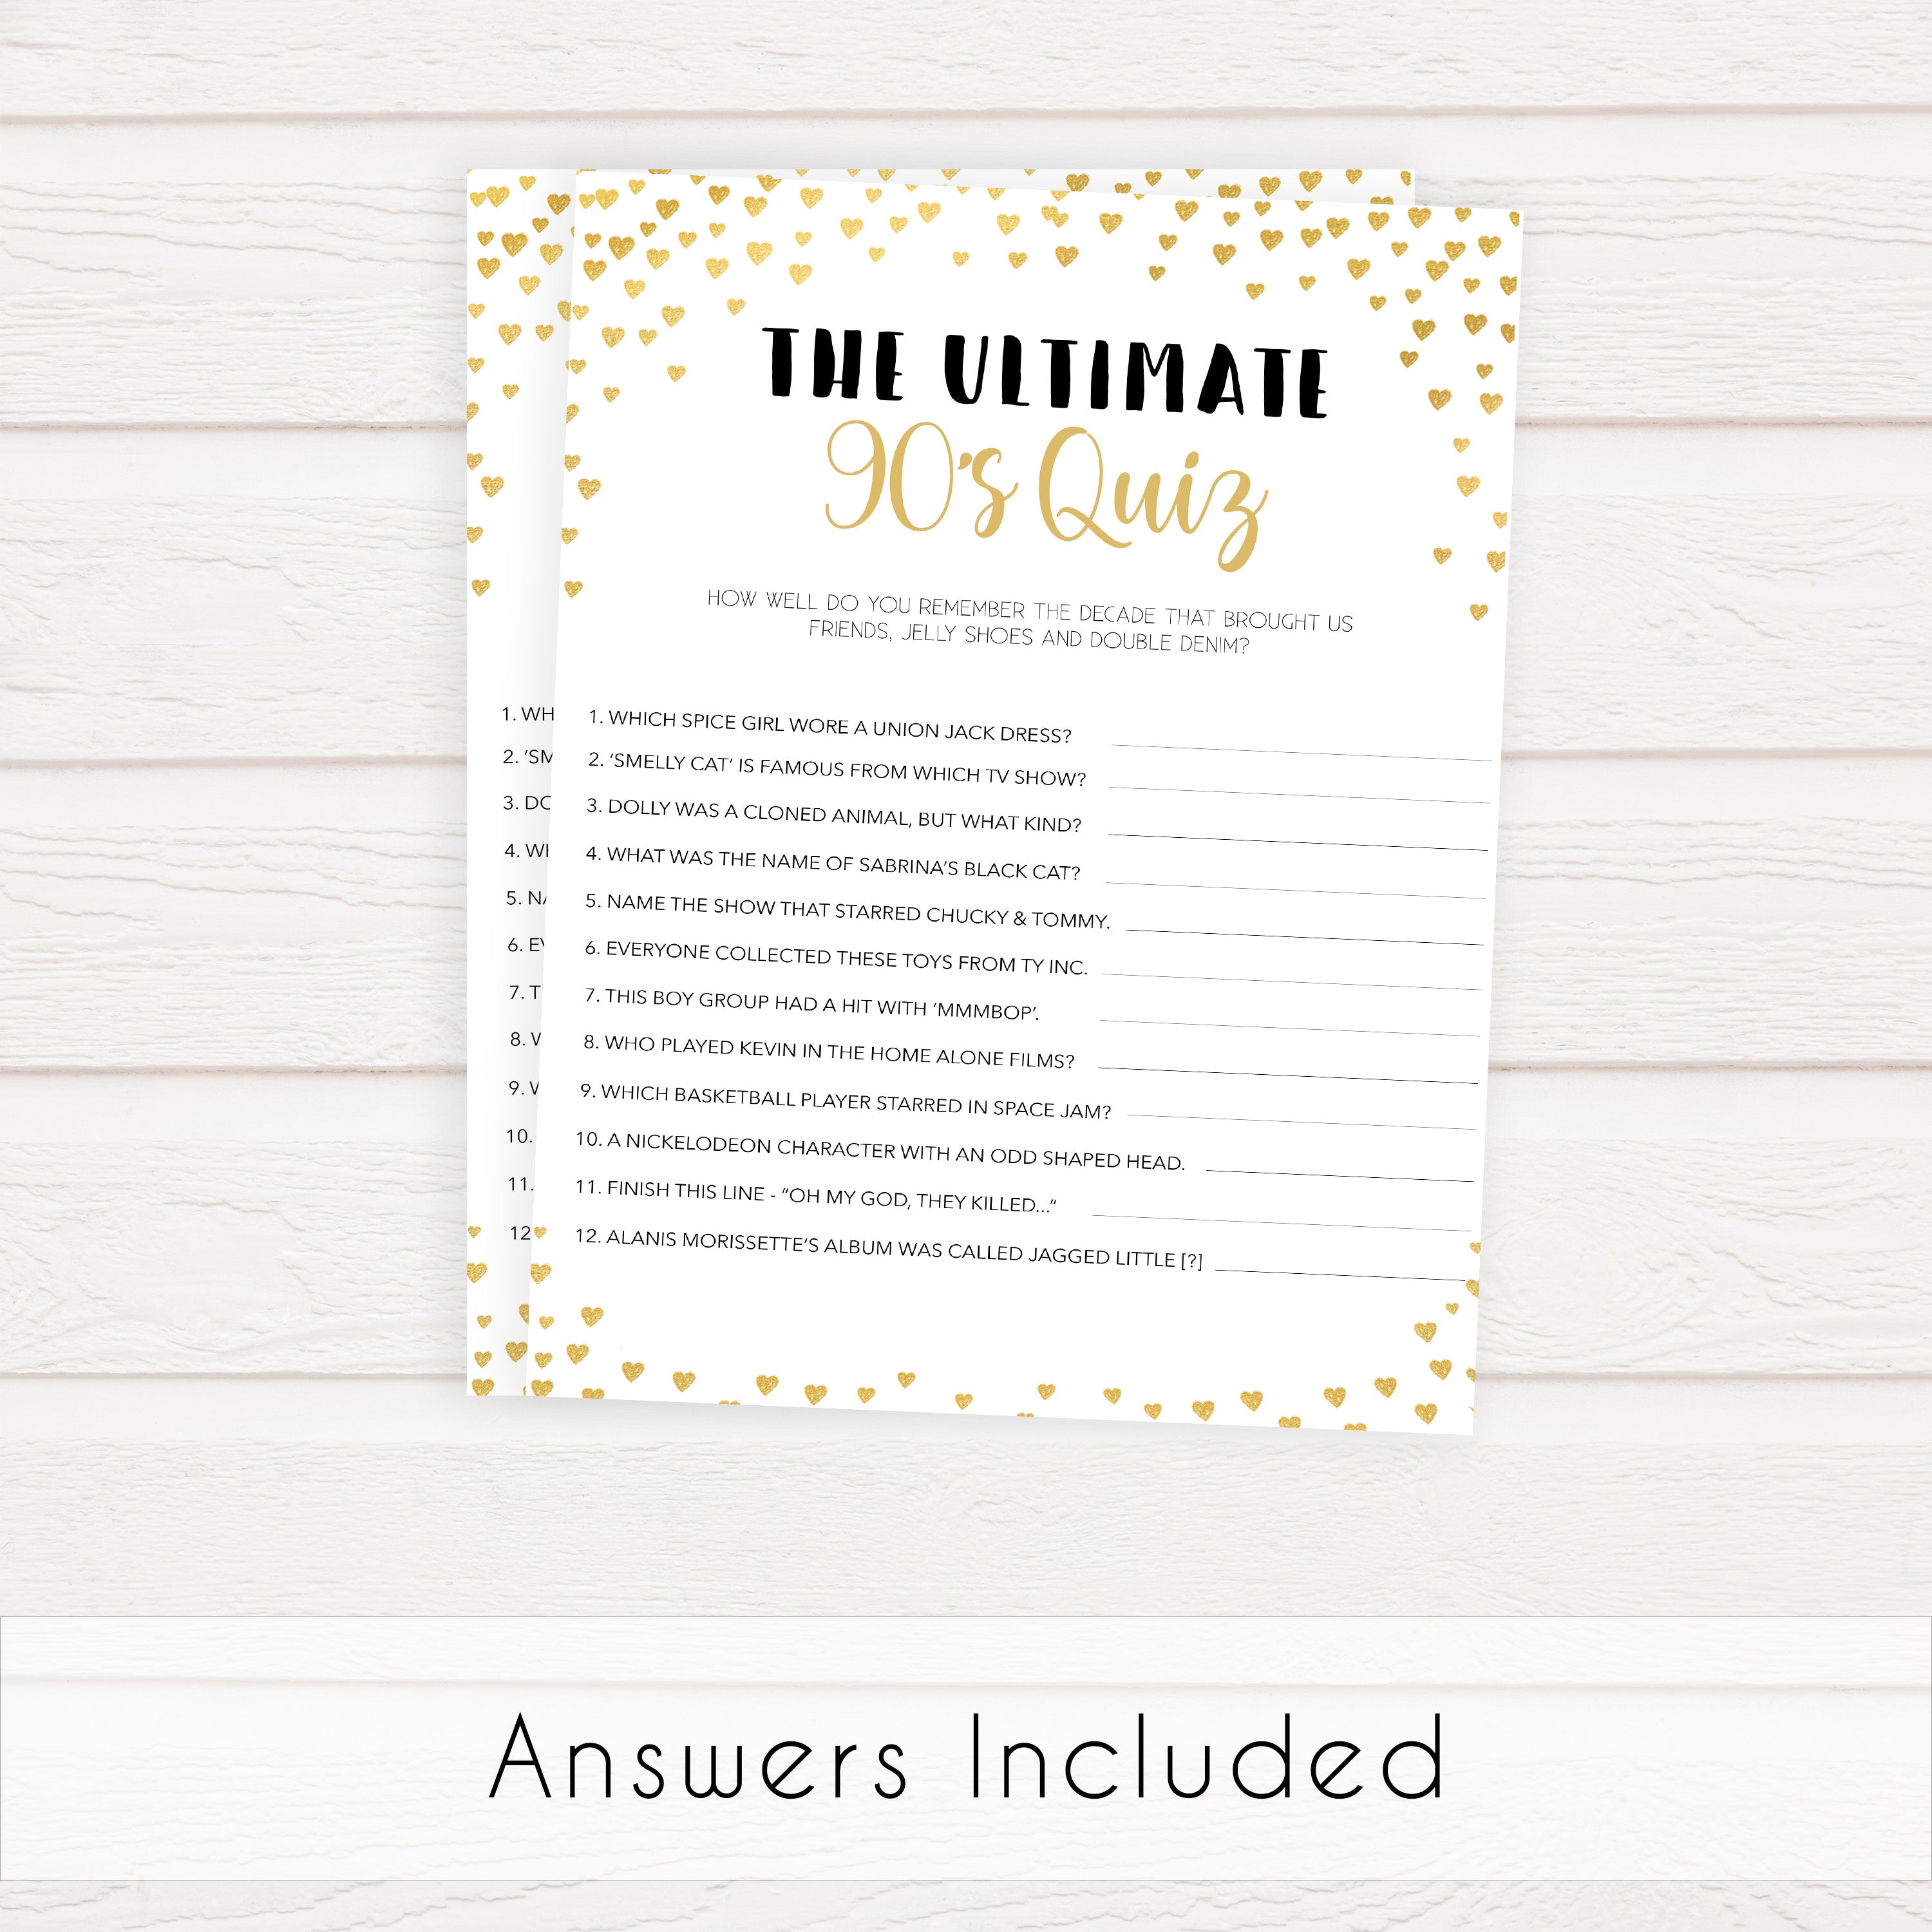 Gold hearts bachelorette games, ultimate 90s quiz game, printable bachelorette games, hen party games, top party games, fun bridal shower games, bachelorette party games